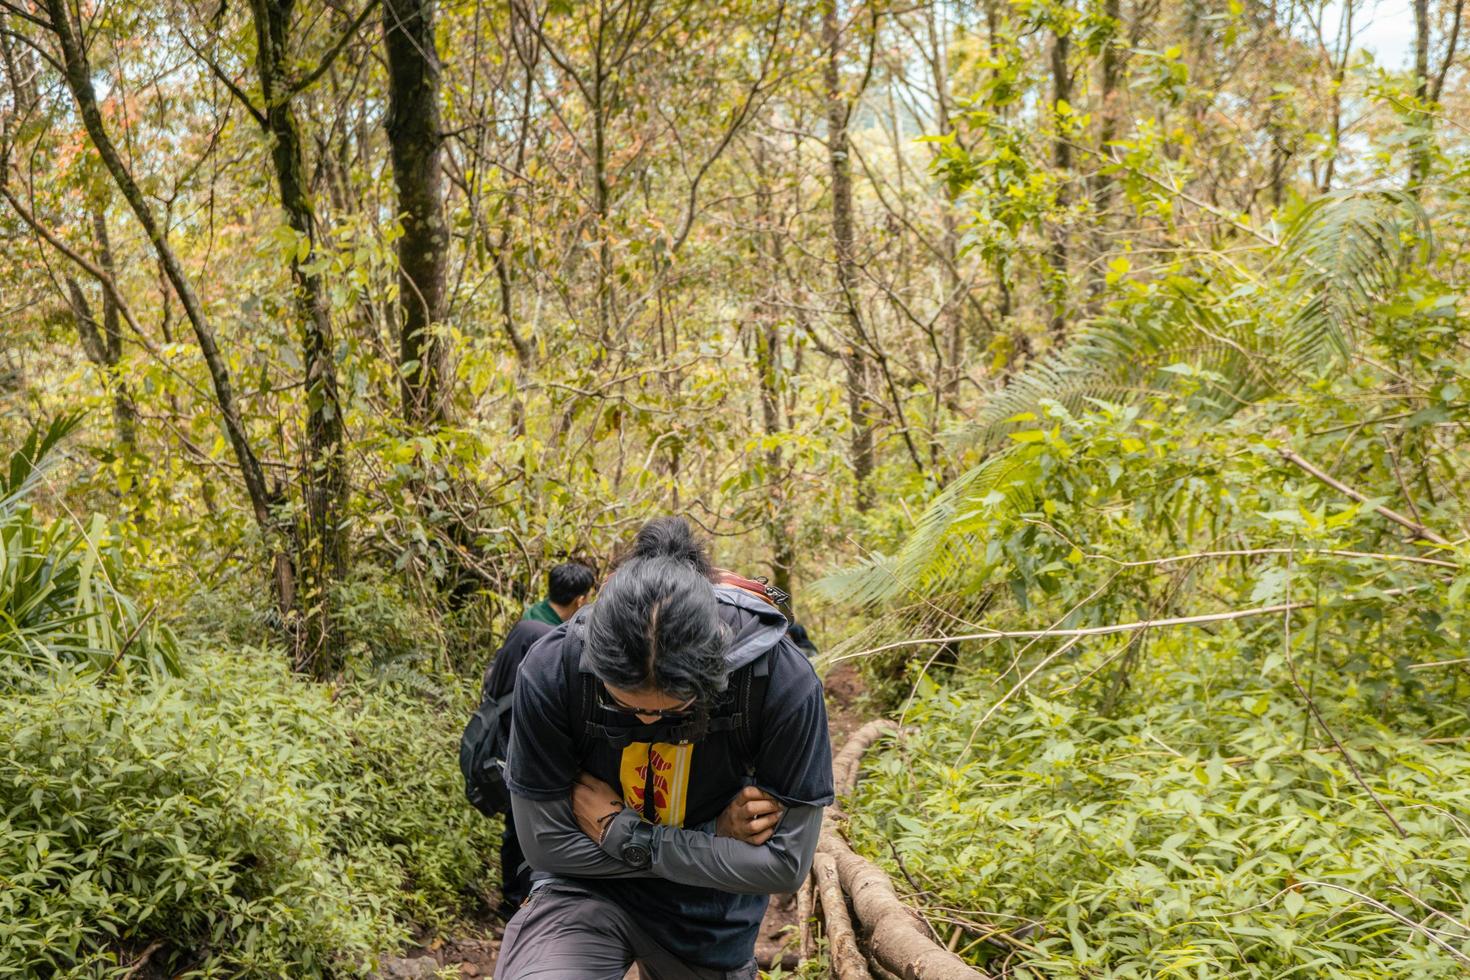 Man got journey on the forest going to peak mountain on Semarang Central Java. The photo is suitable to use for adventure content media, nature poster and forest background.